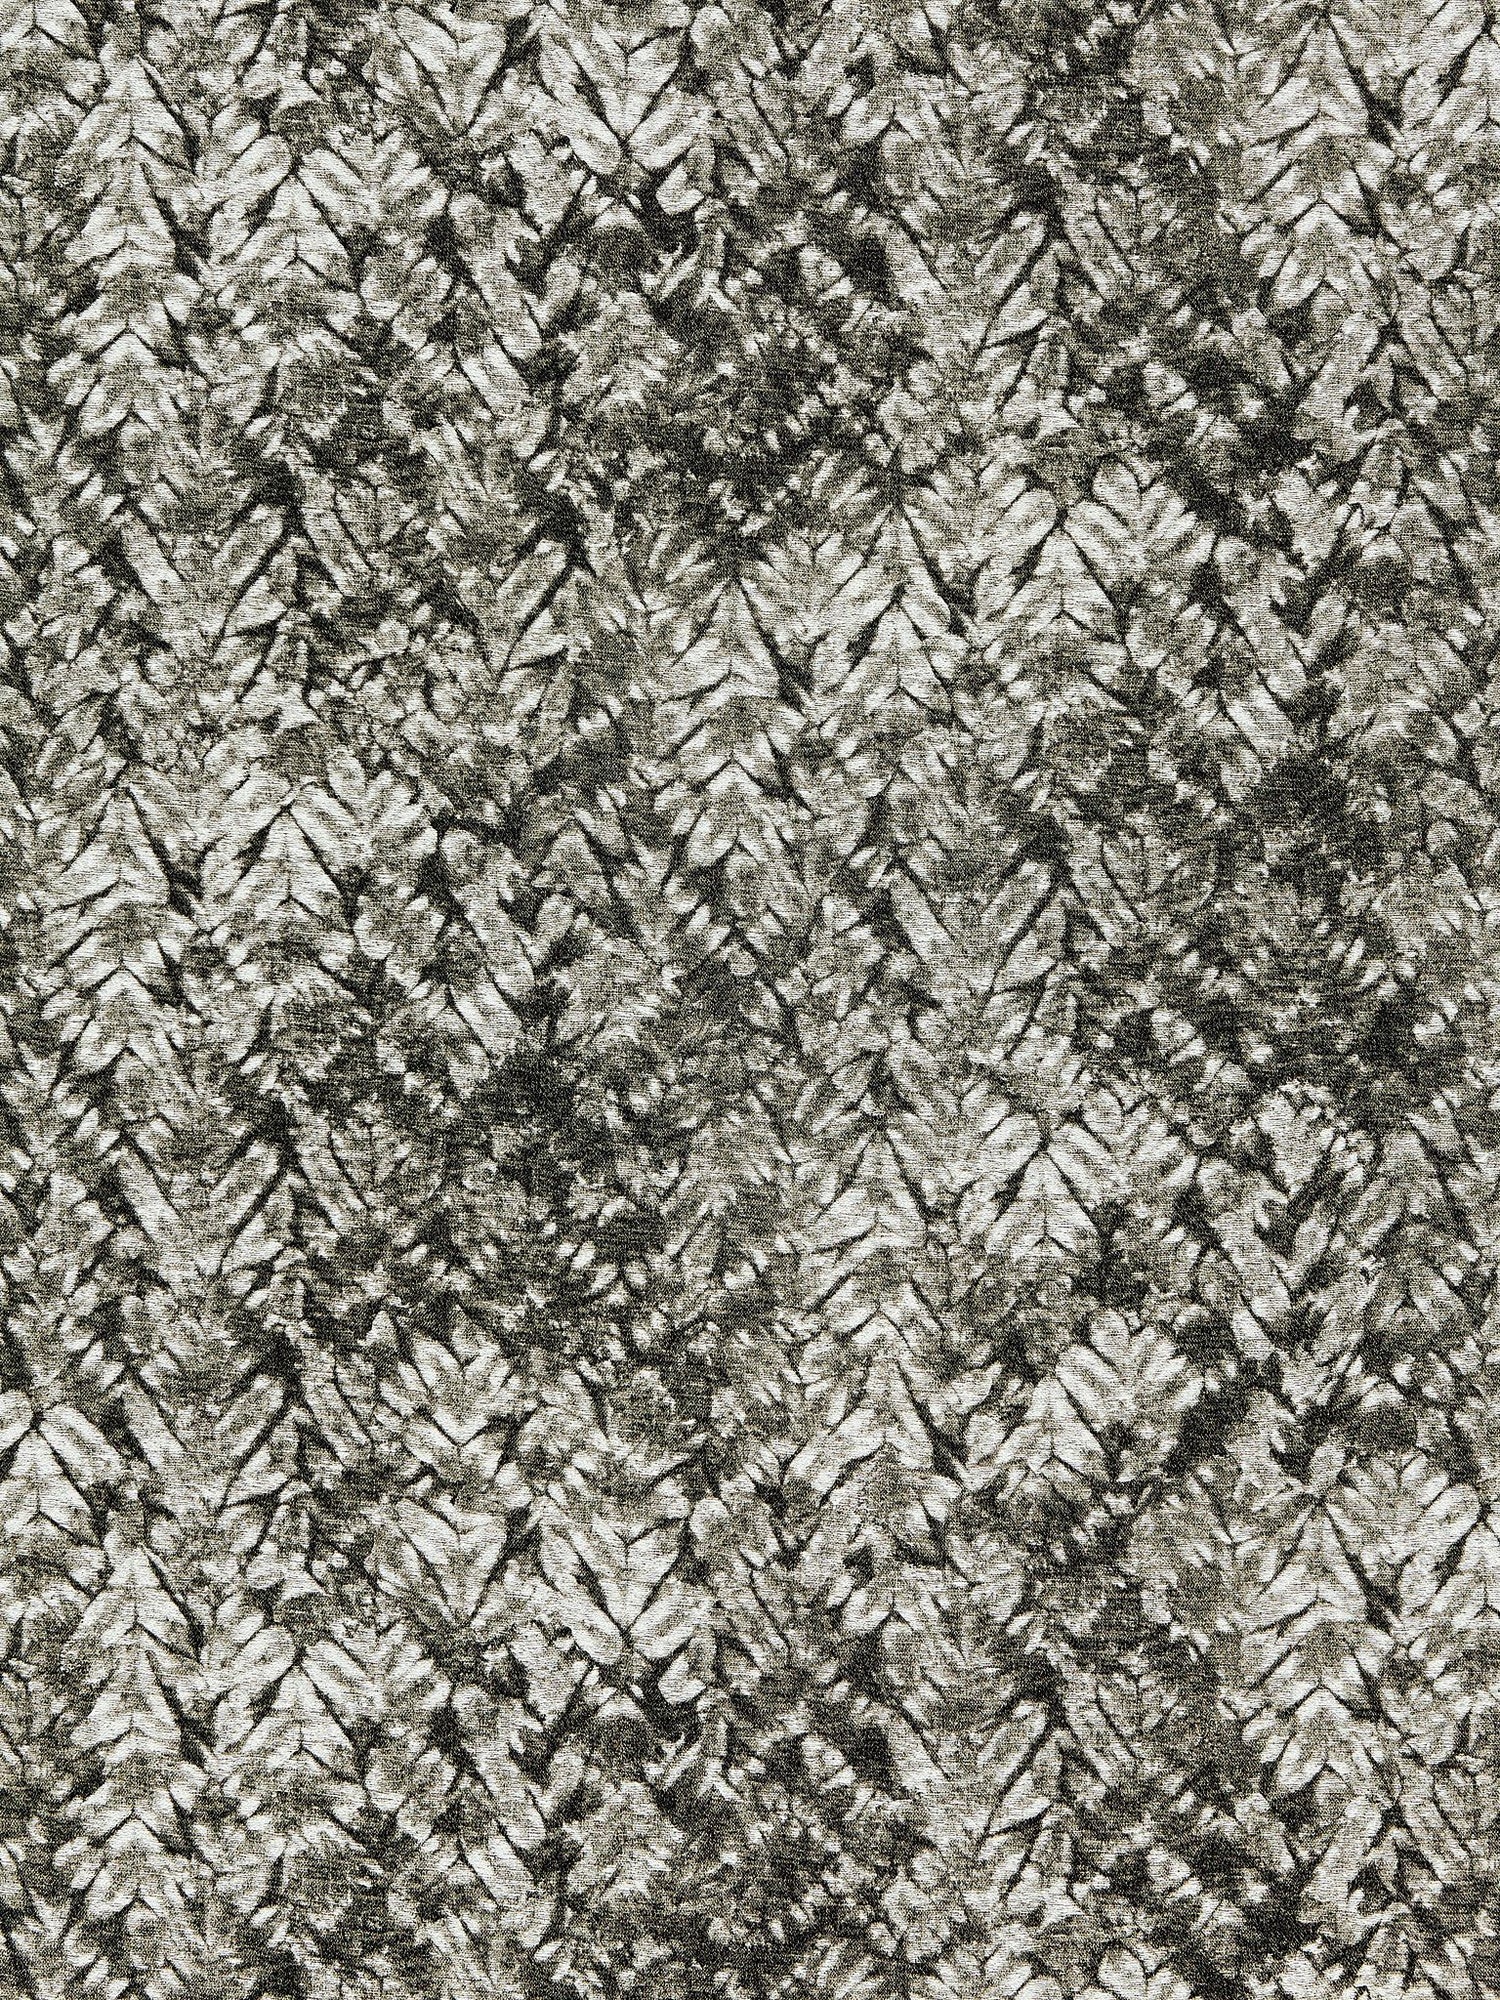 Fiji Weave fabric in stone color - pattern number SC 000127199 - by Scalamandre in the Scalamandre Fabrics Book 1 collection